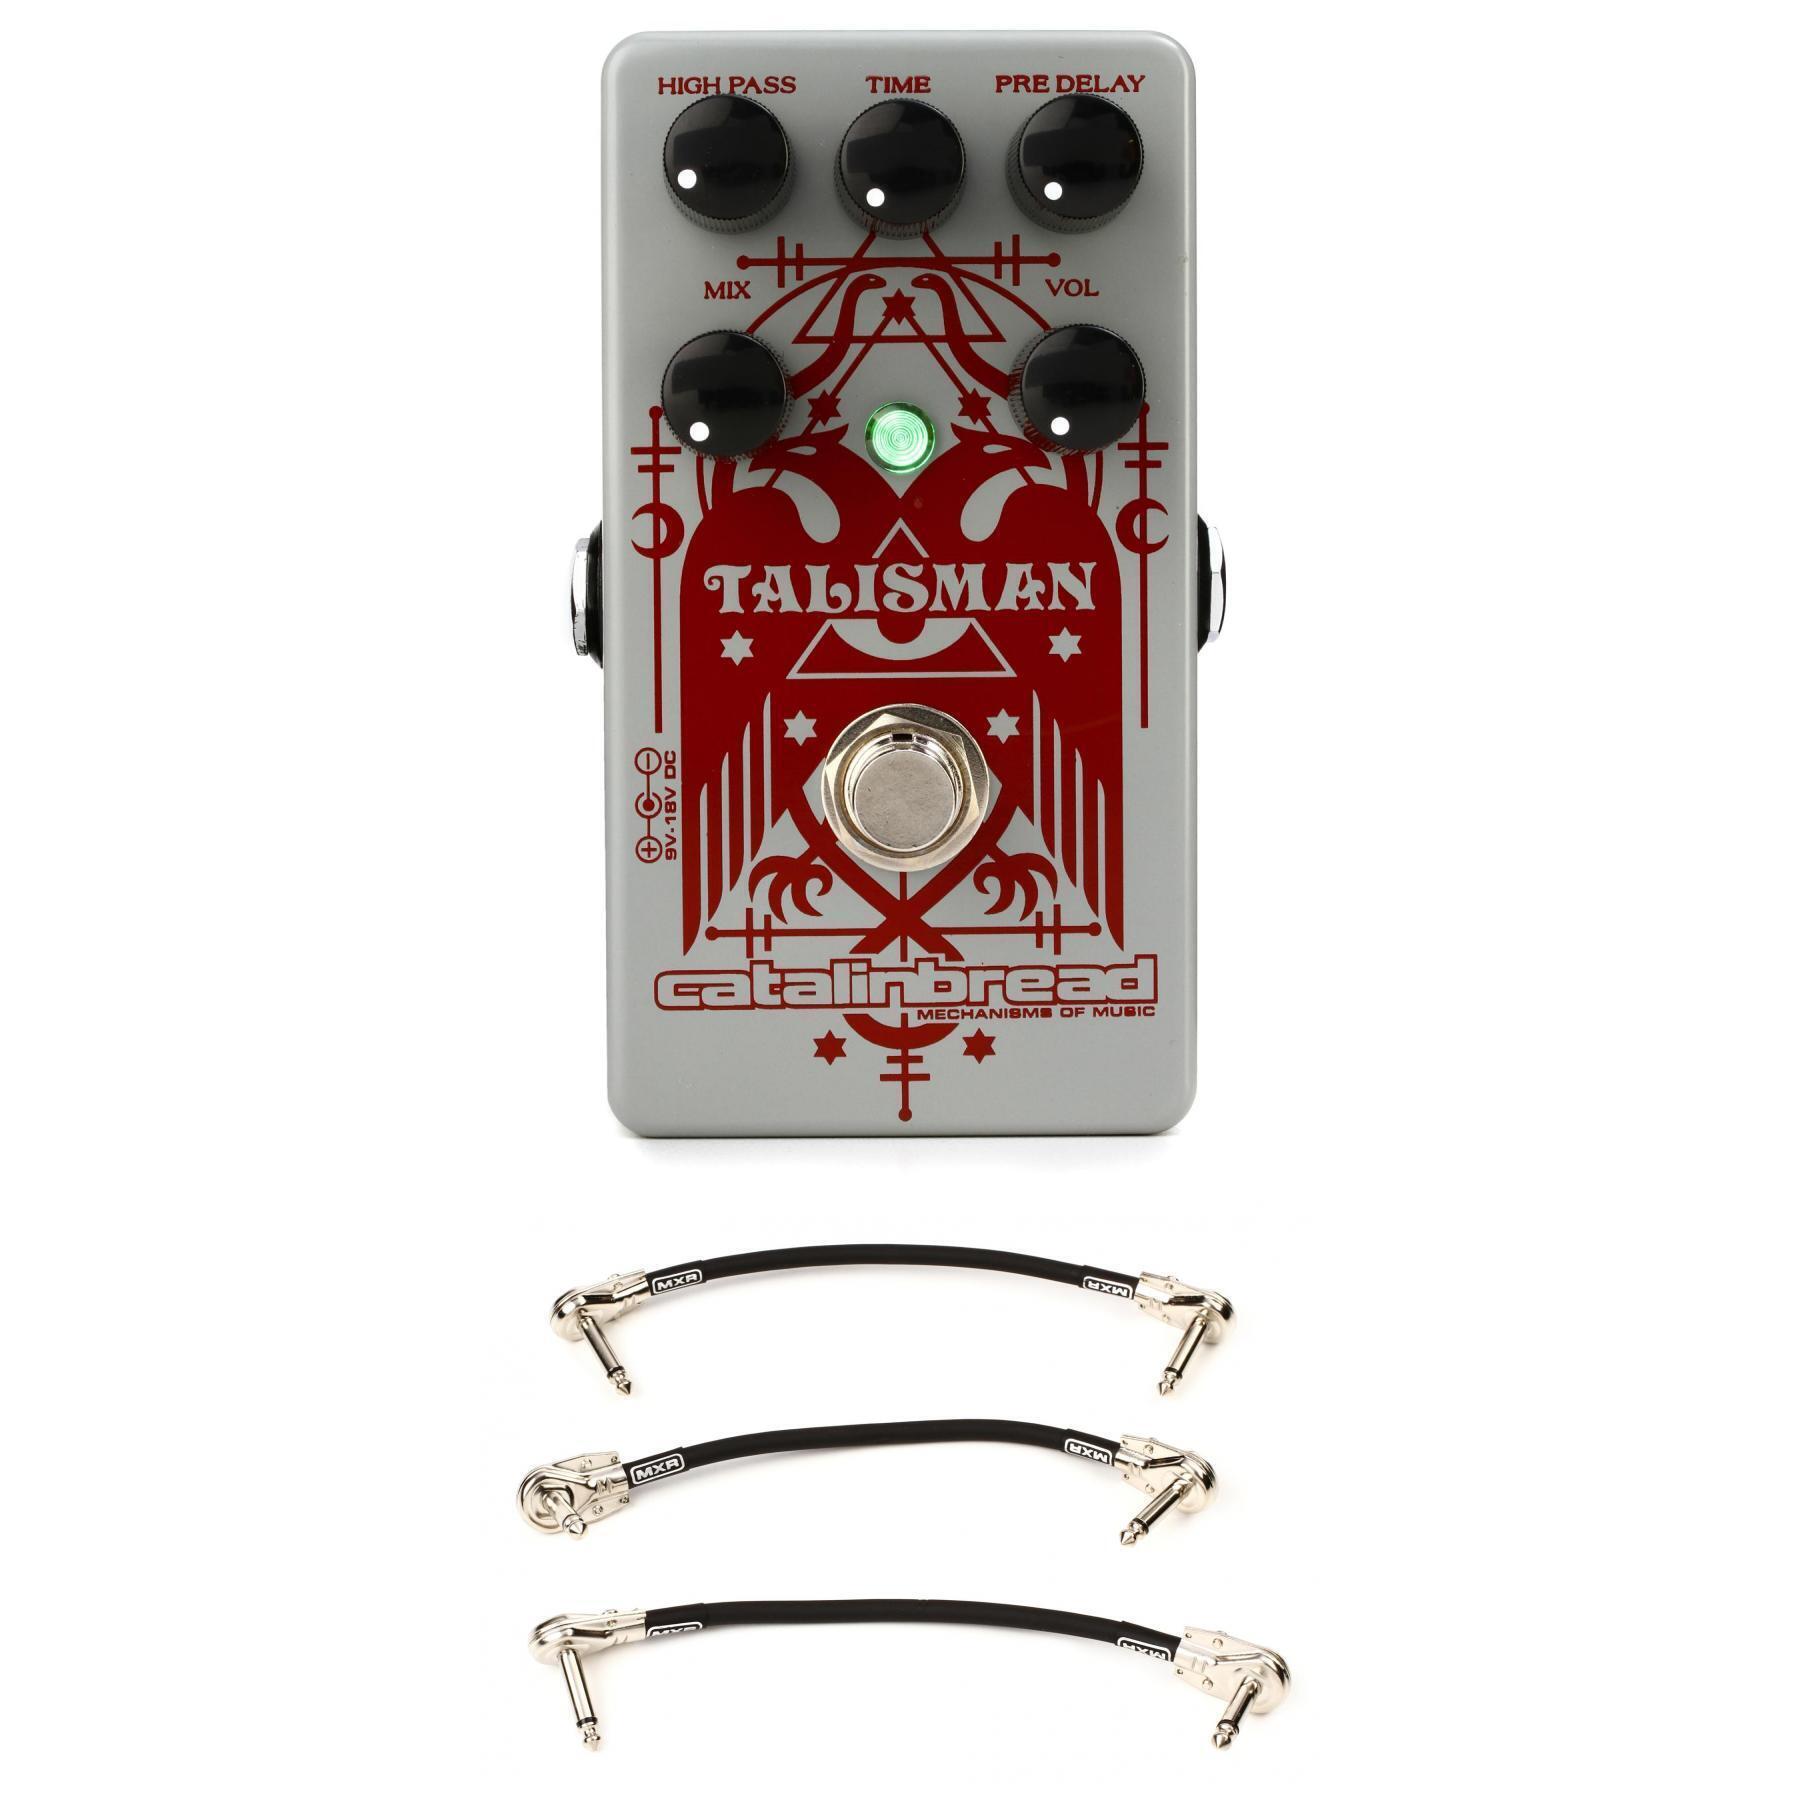 Catalinbread Talisman Plate Reverb Pedal with 3 Patch Cables